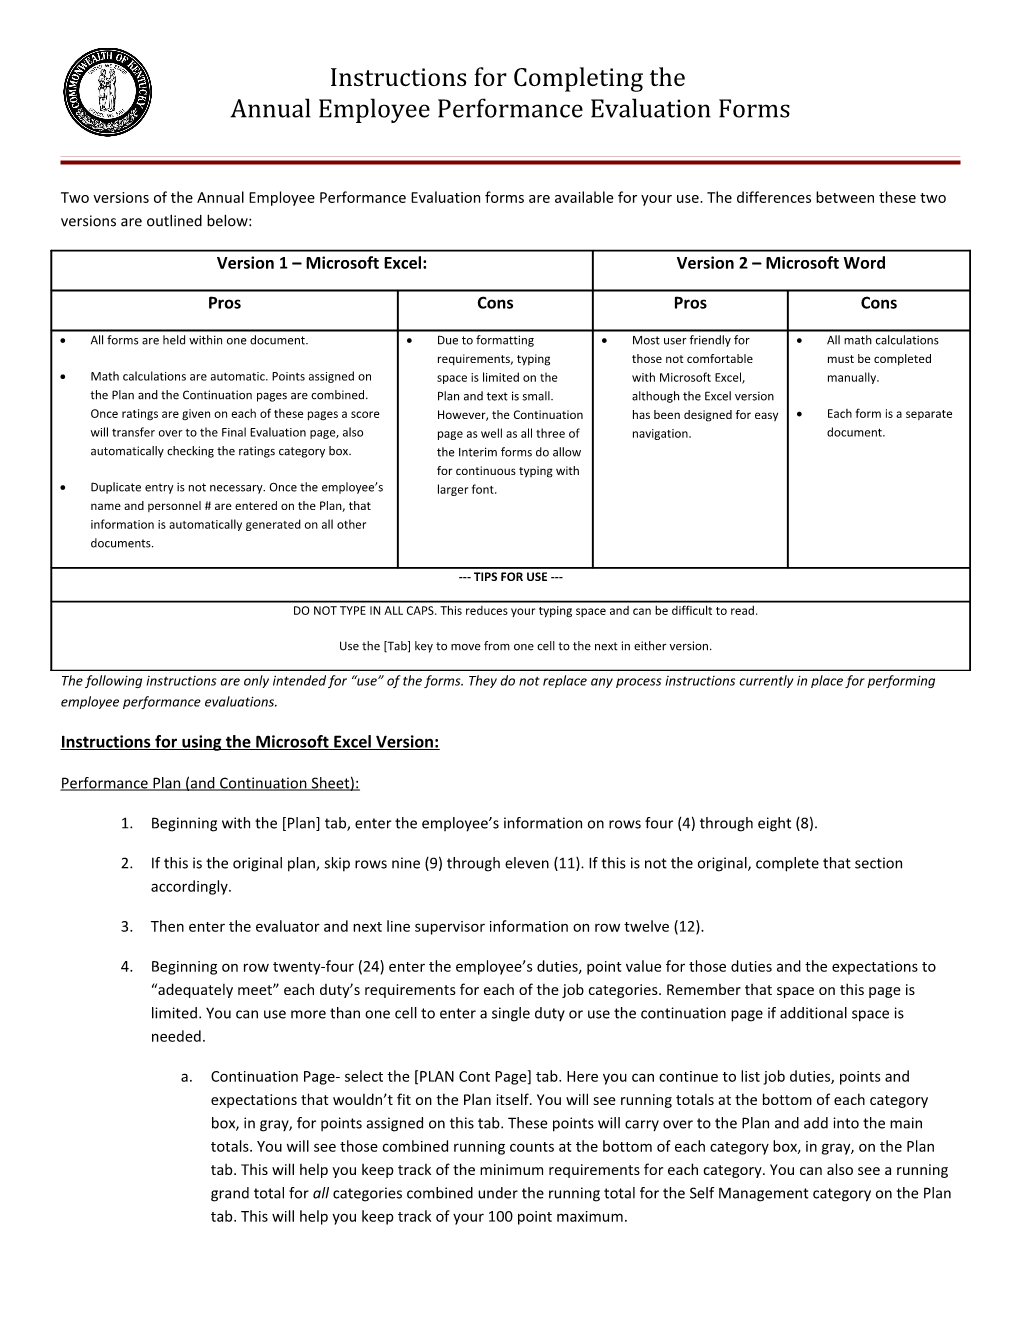 Annual Employee Performance Evaluation Forms